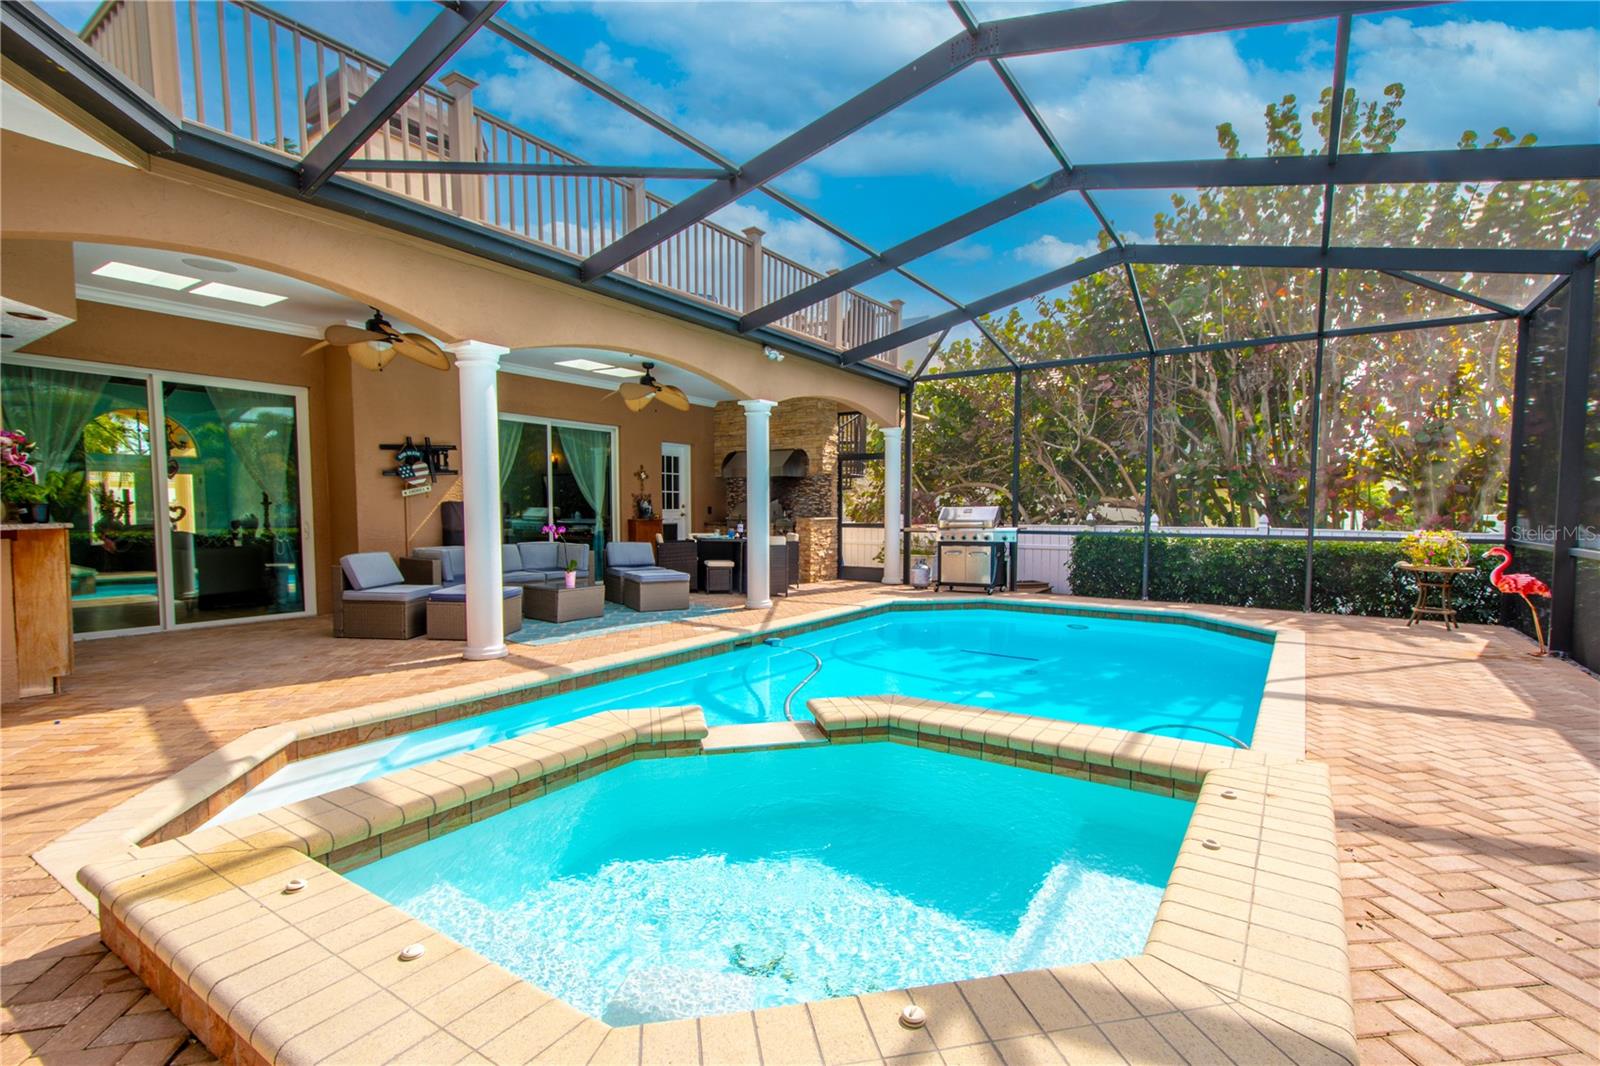 The pool and patio are designed for indoor/outdoor living.